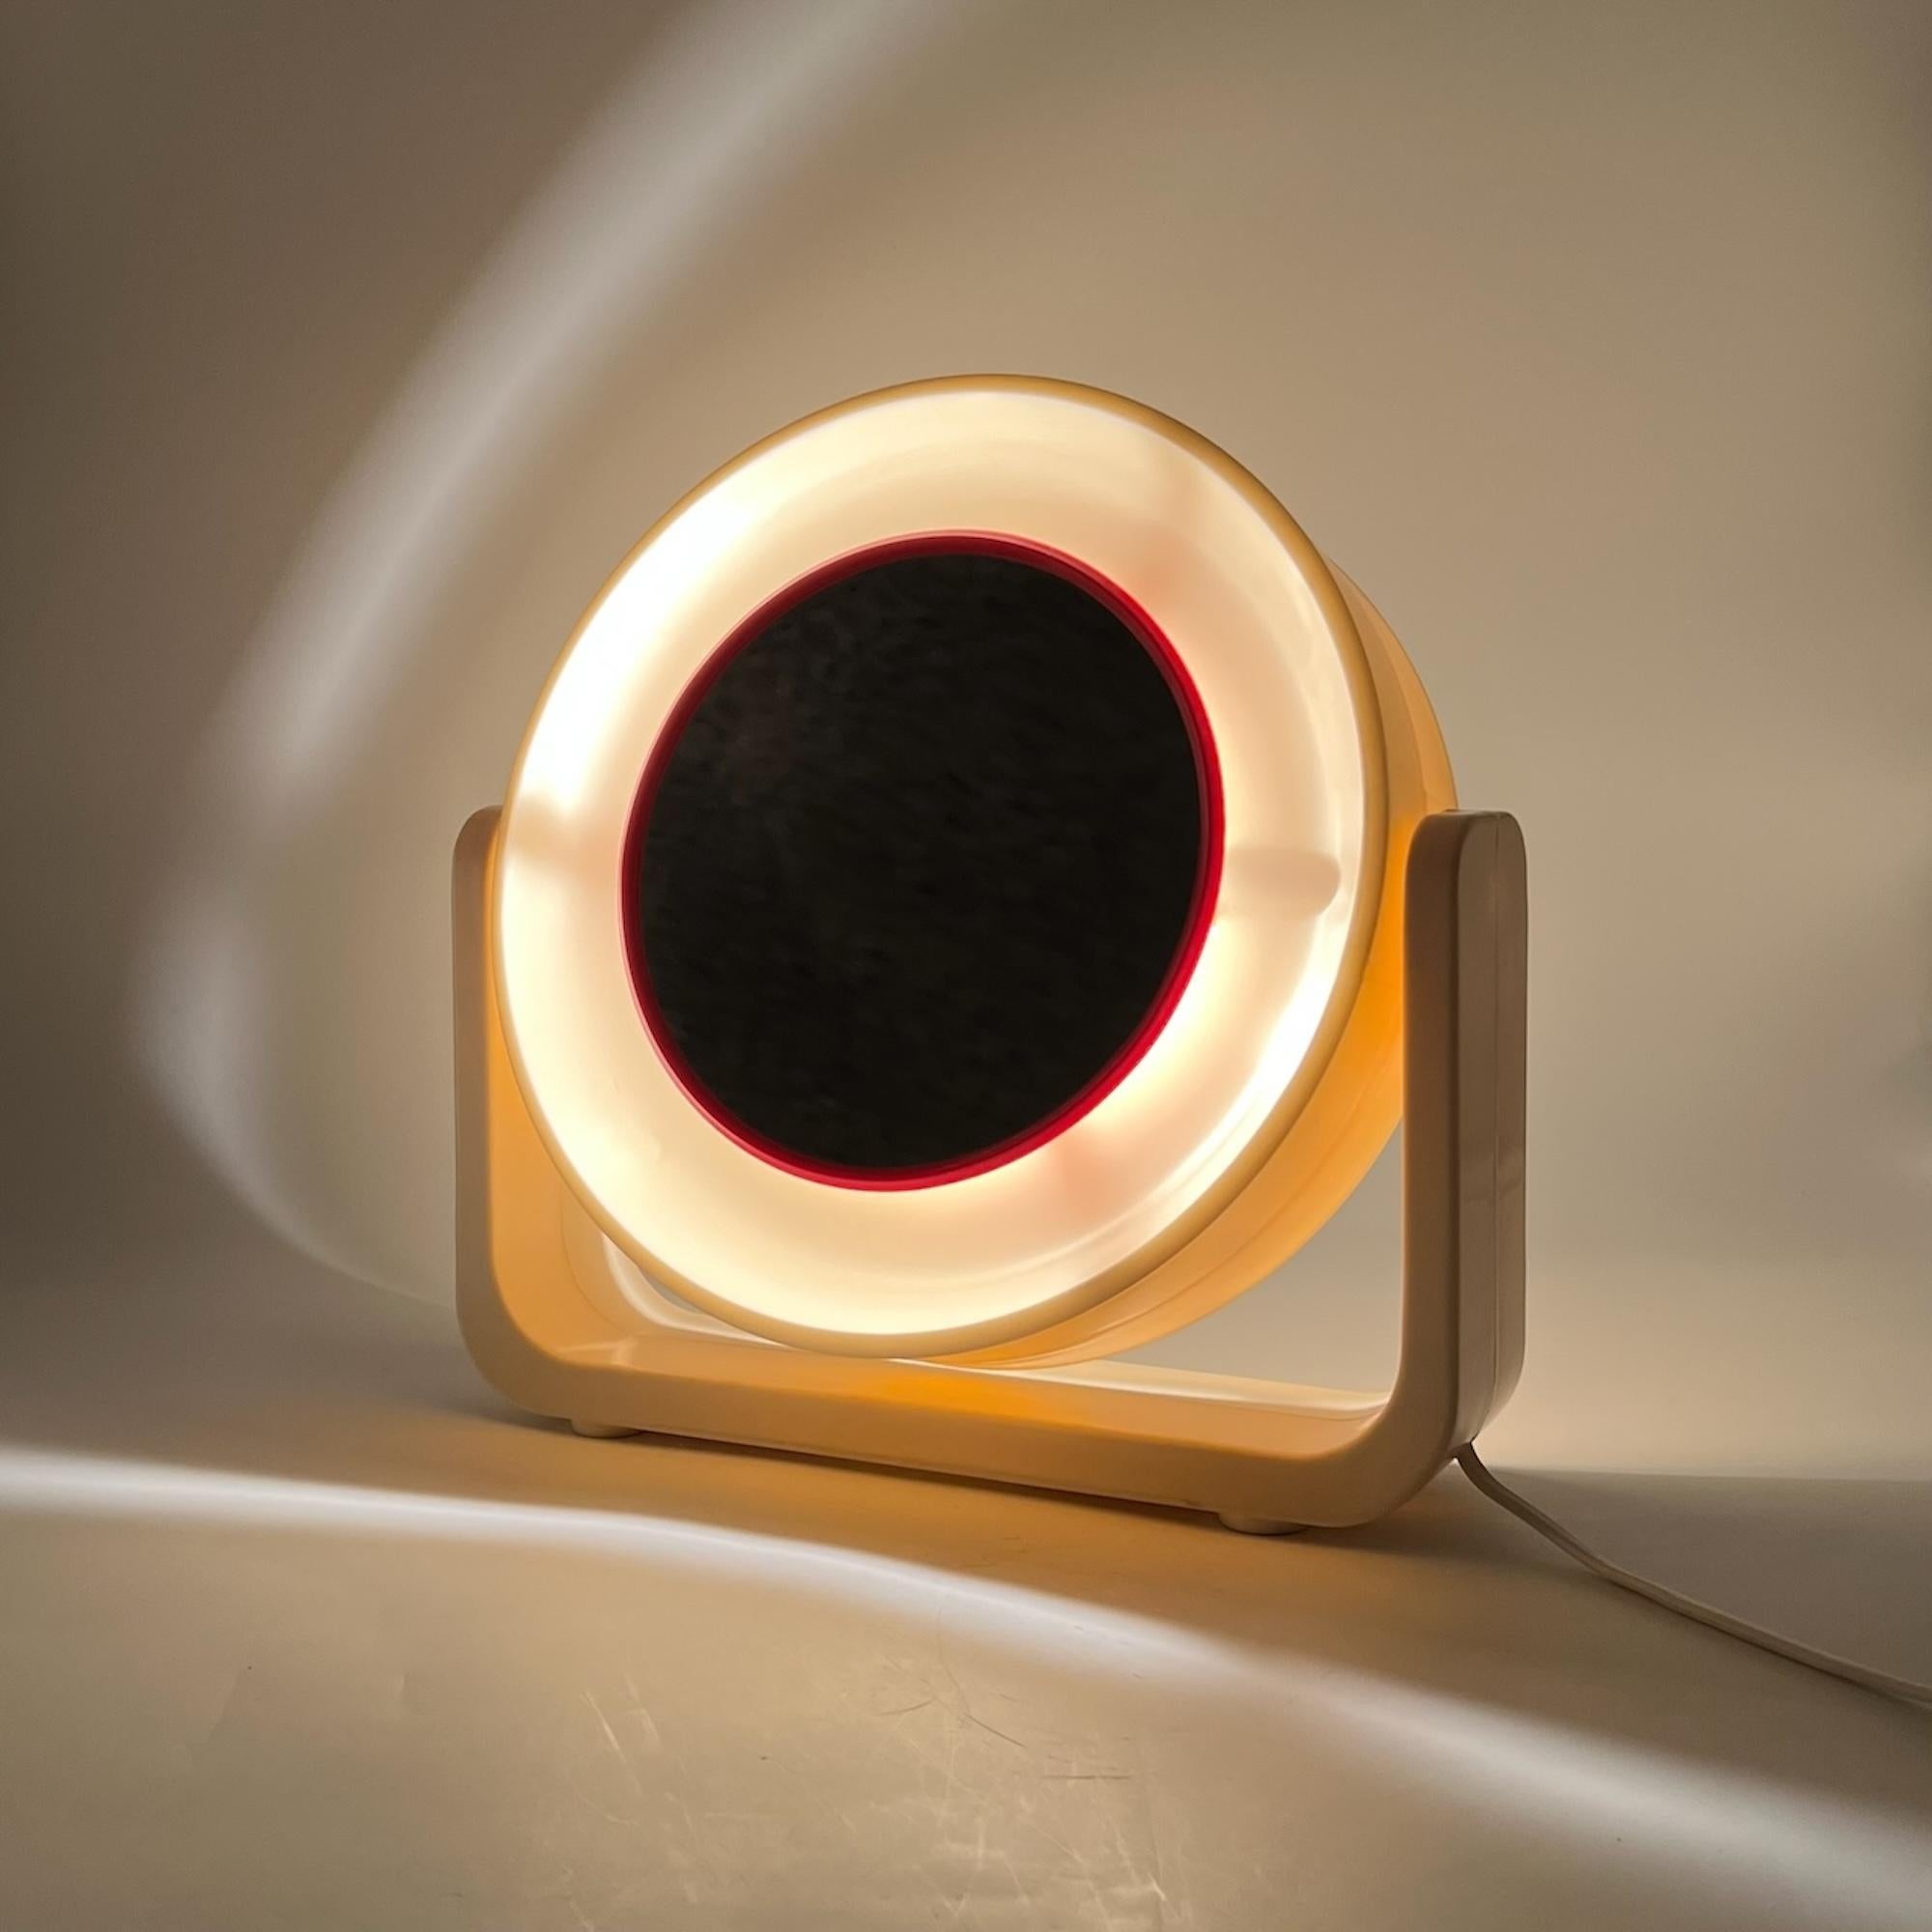 Discover the timeless elegance of this very rare space age mirror with light, produced by Allstar in West Germany during the 1960s. This beautifully crafted piece, with its elegant cream hue and red accents, offers a unique combination of style and